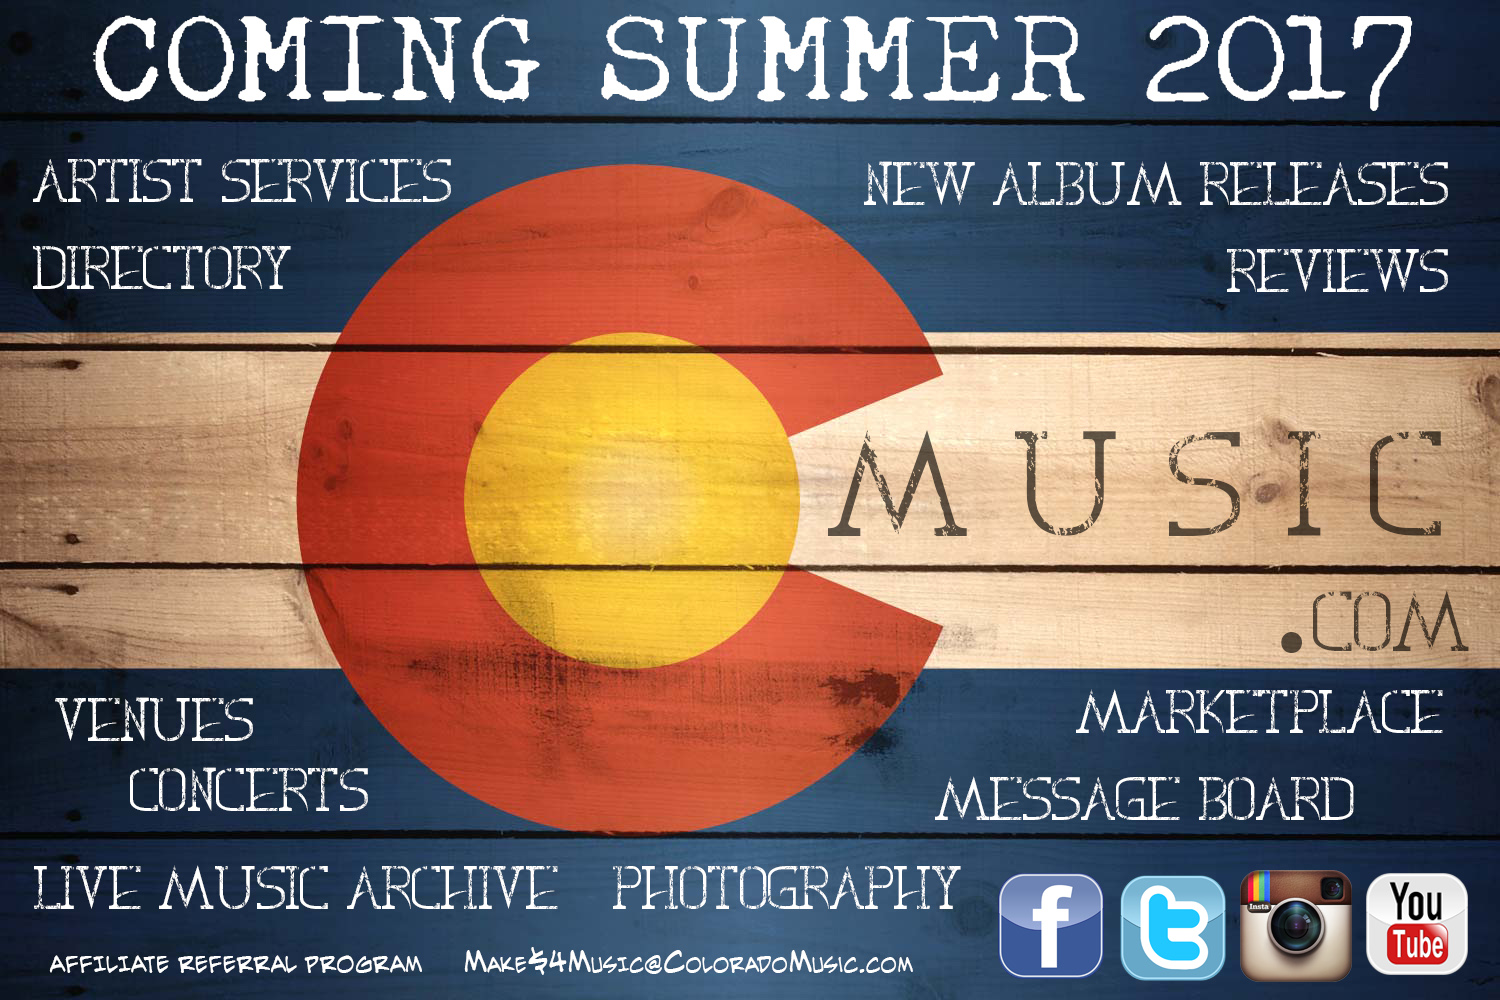 Coming Summer 2017 - Colorado Music, venues, concerts, live music, photography